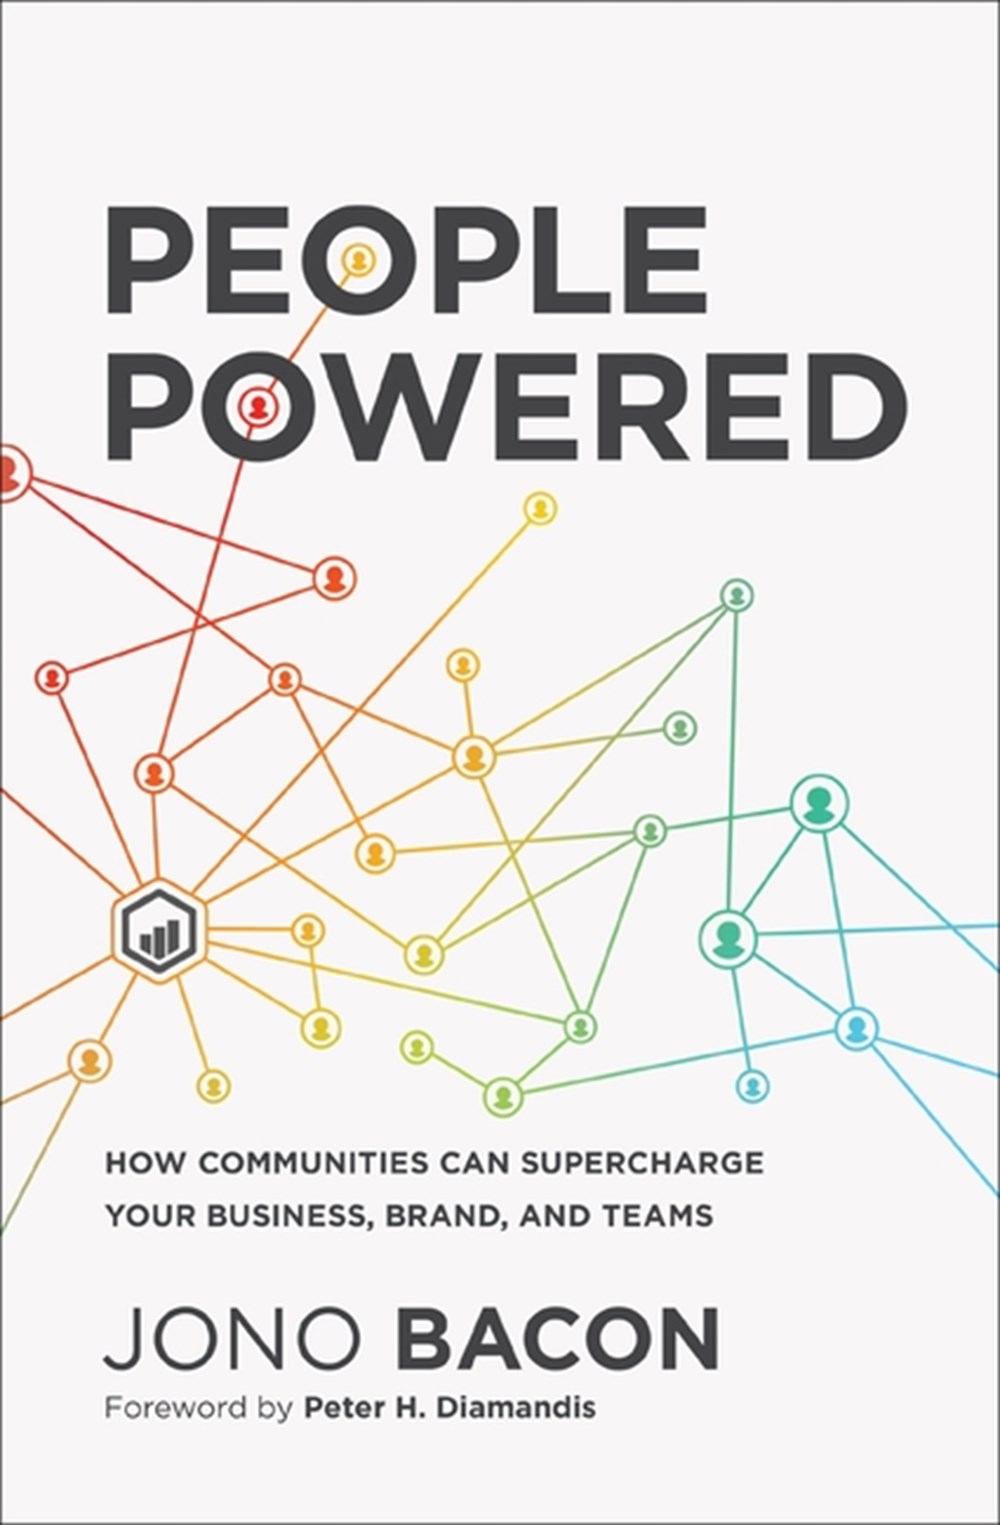 People Powered: How Communities Can Supercharge Your Business, Brand, and Teams /]Cjono Bacon